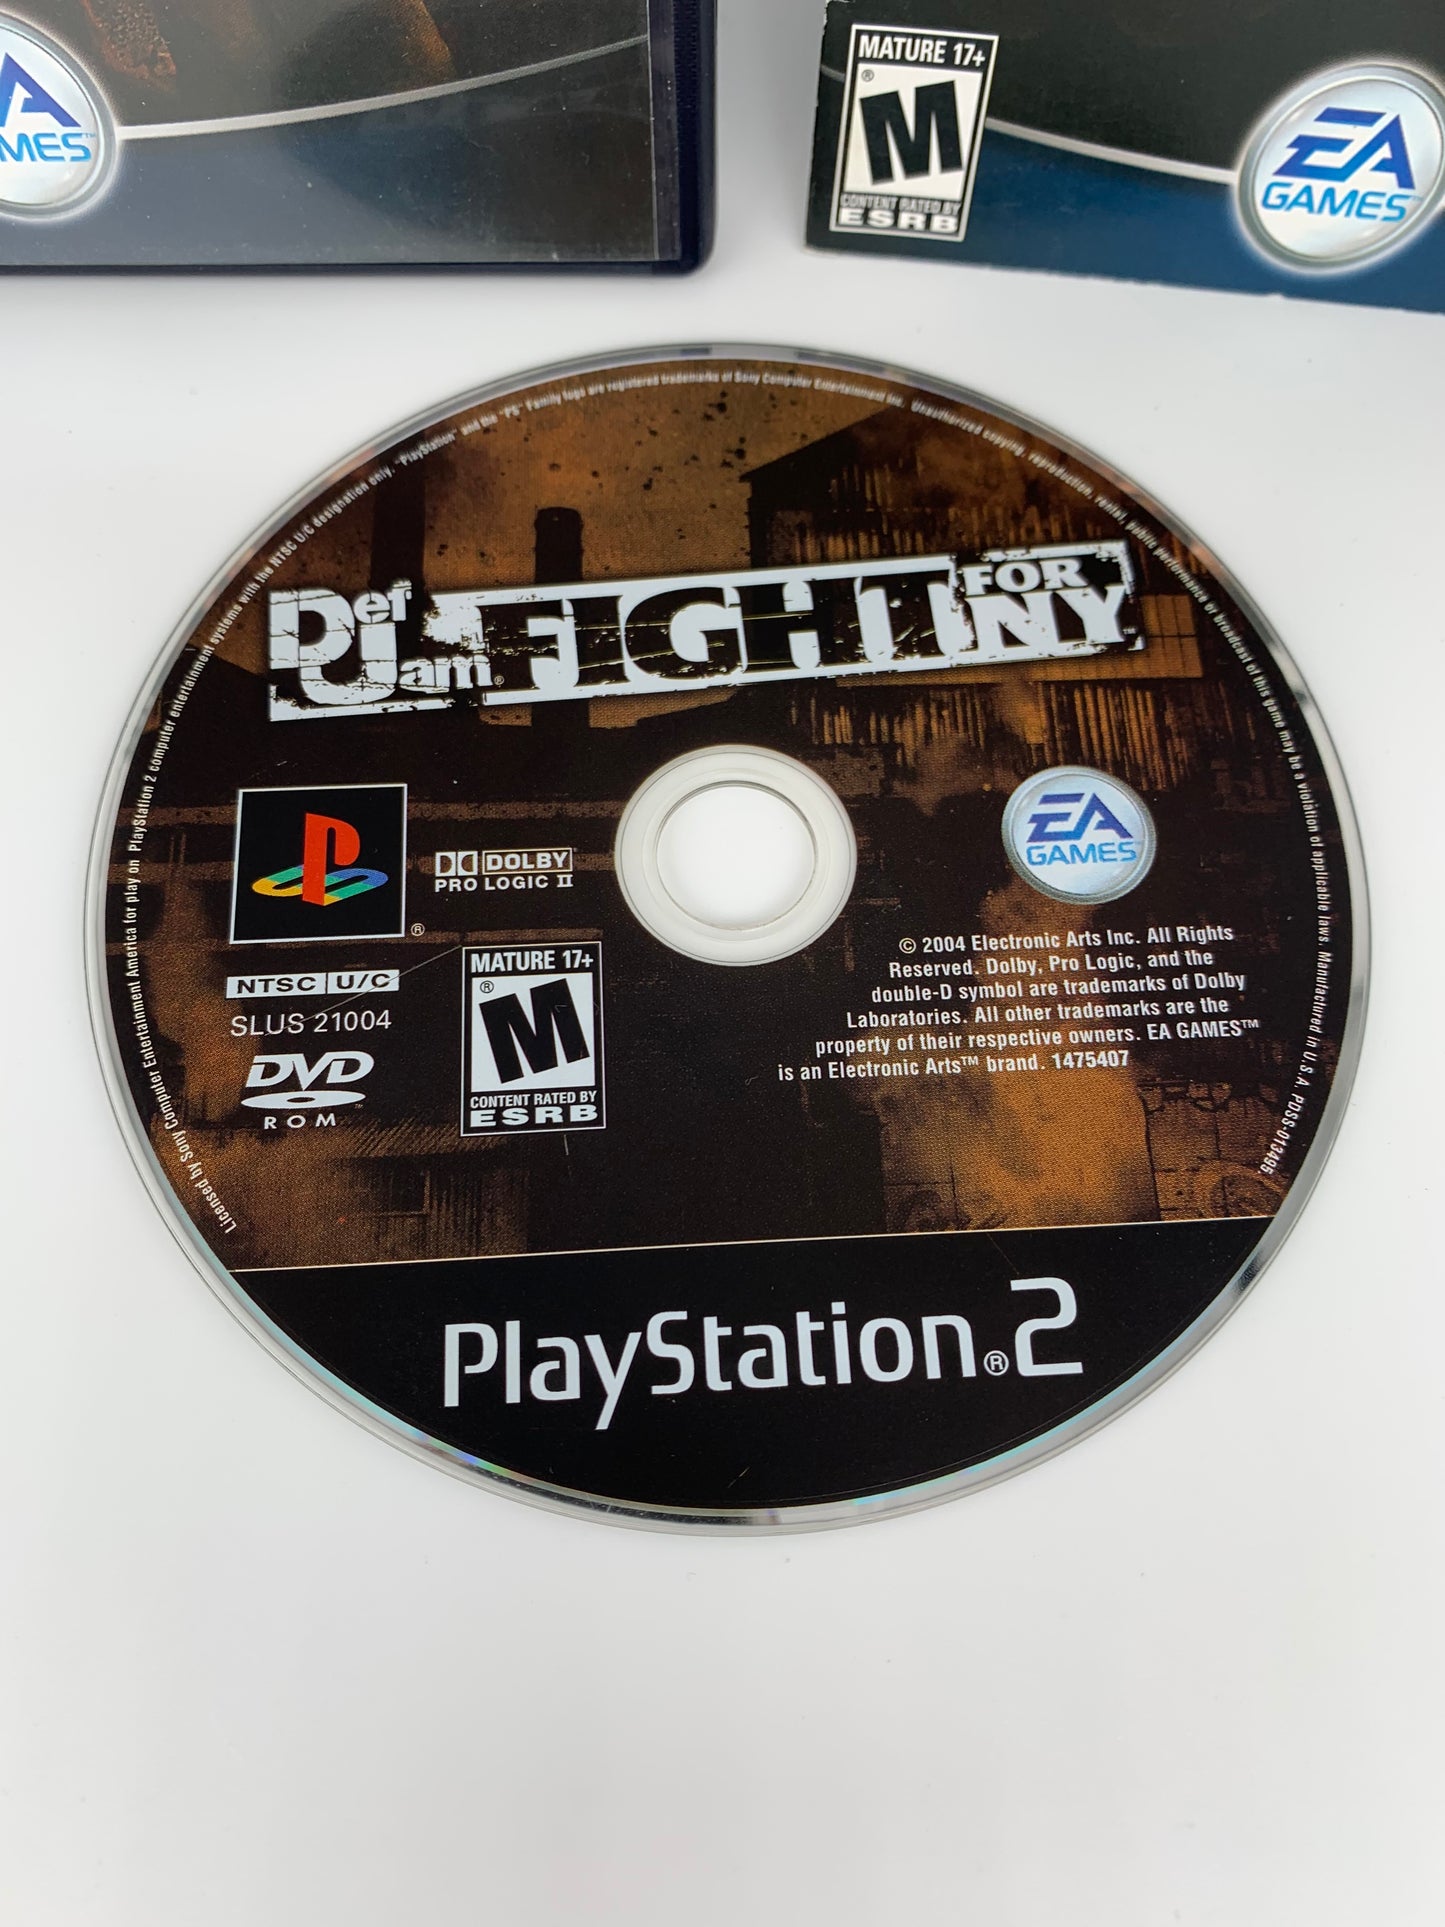 SONY PLAYSTATiON 2 [PS2] | DEF JAM FiGHT FOR NY